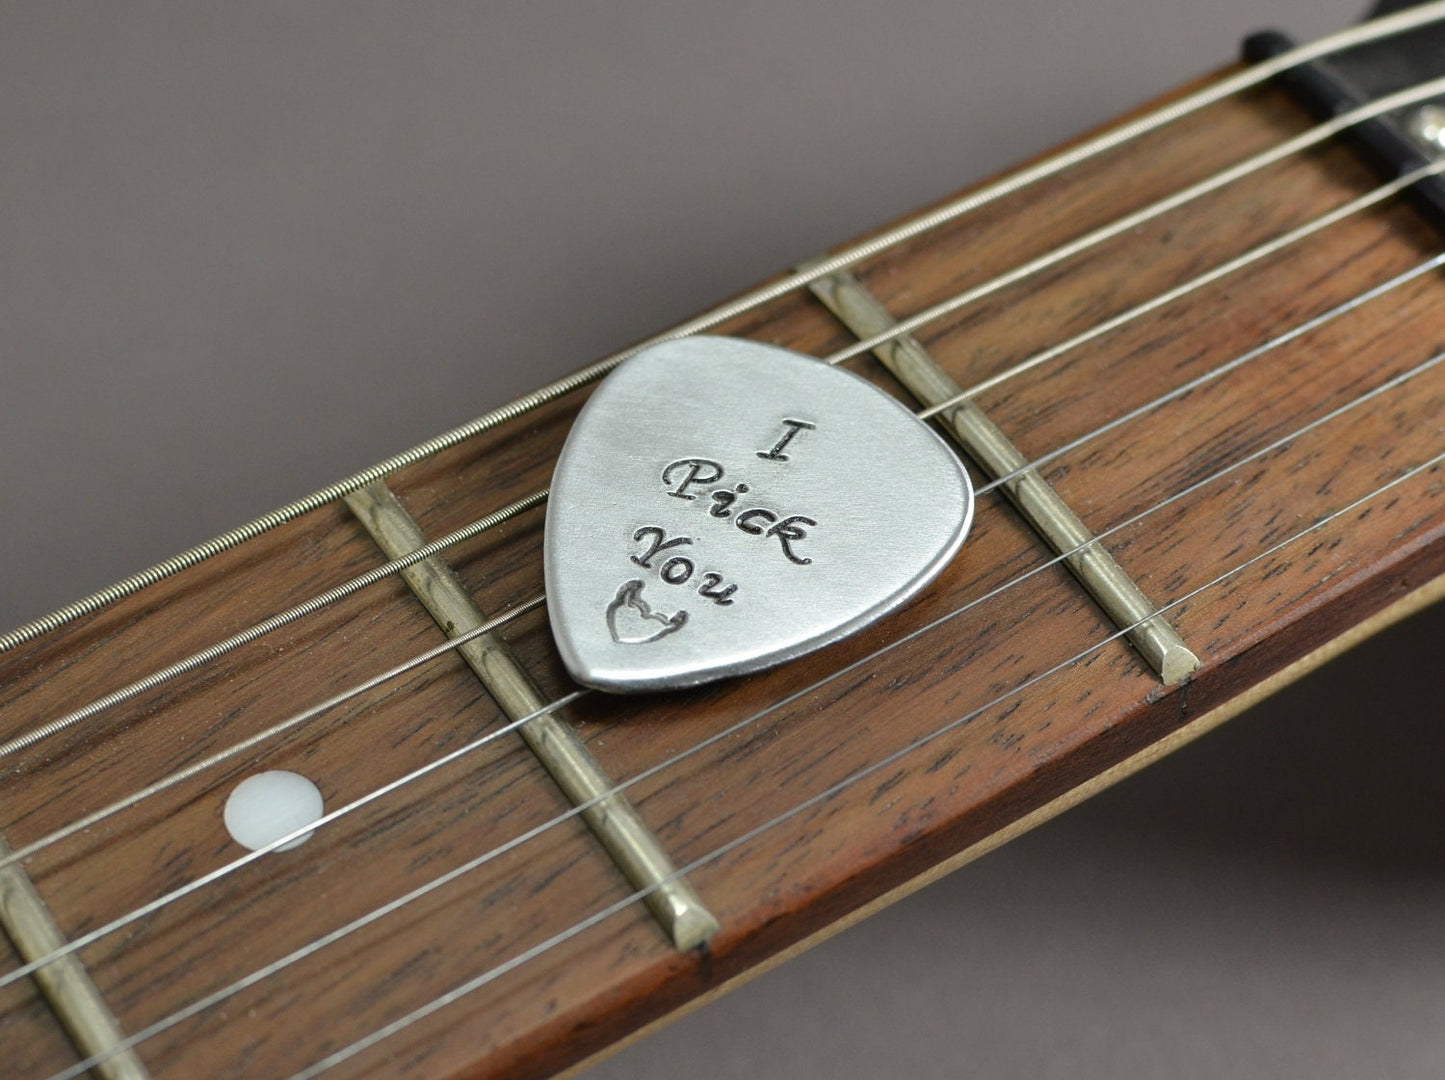 Medium sized guitar pick with I pick you in aluminum